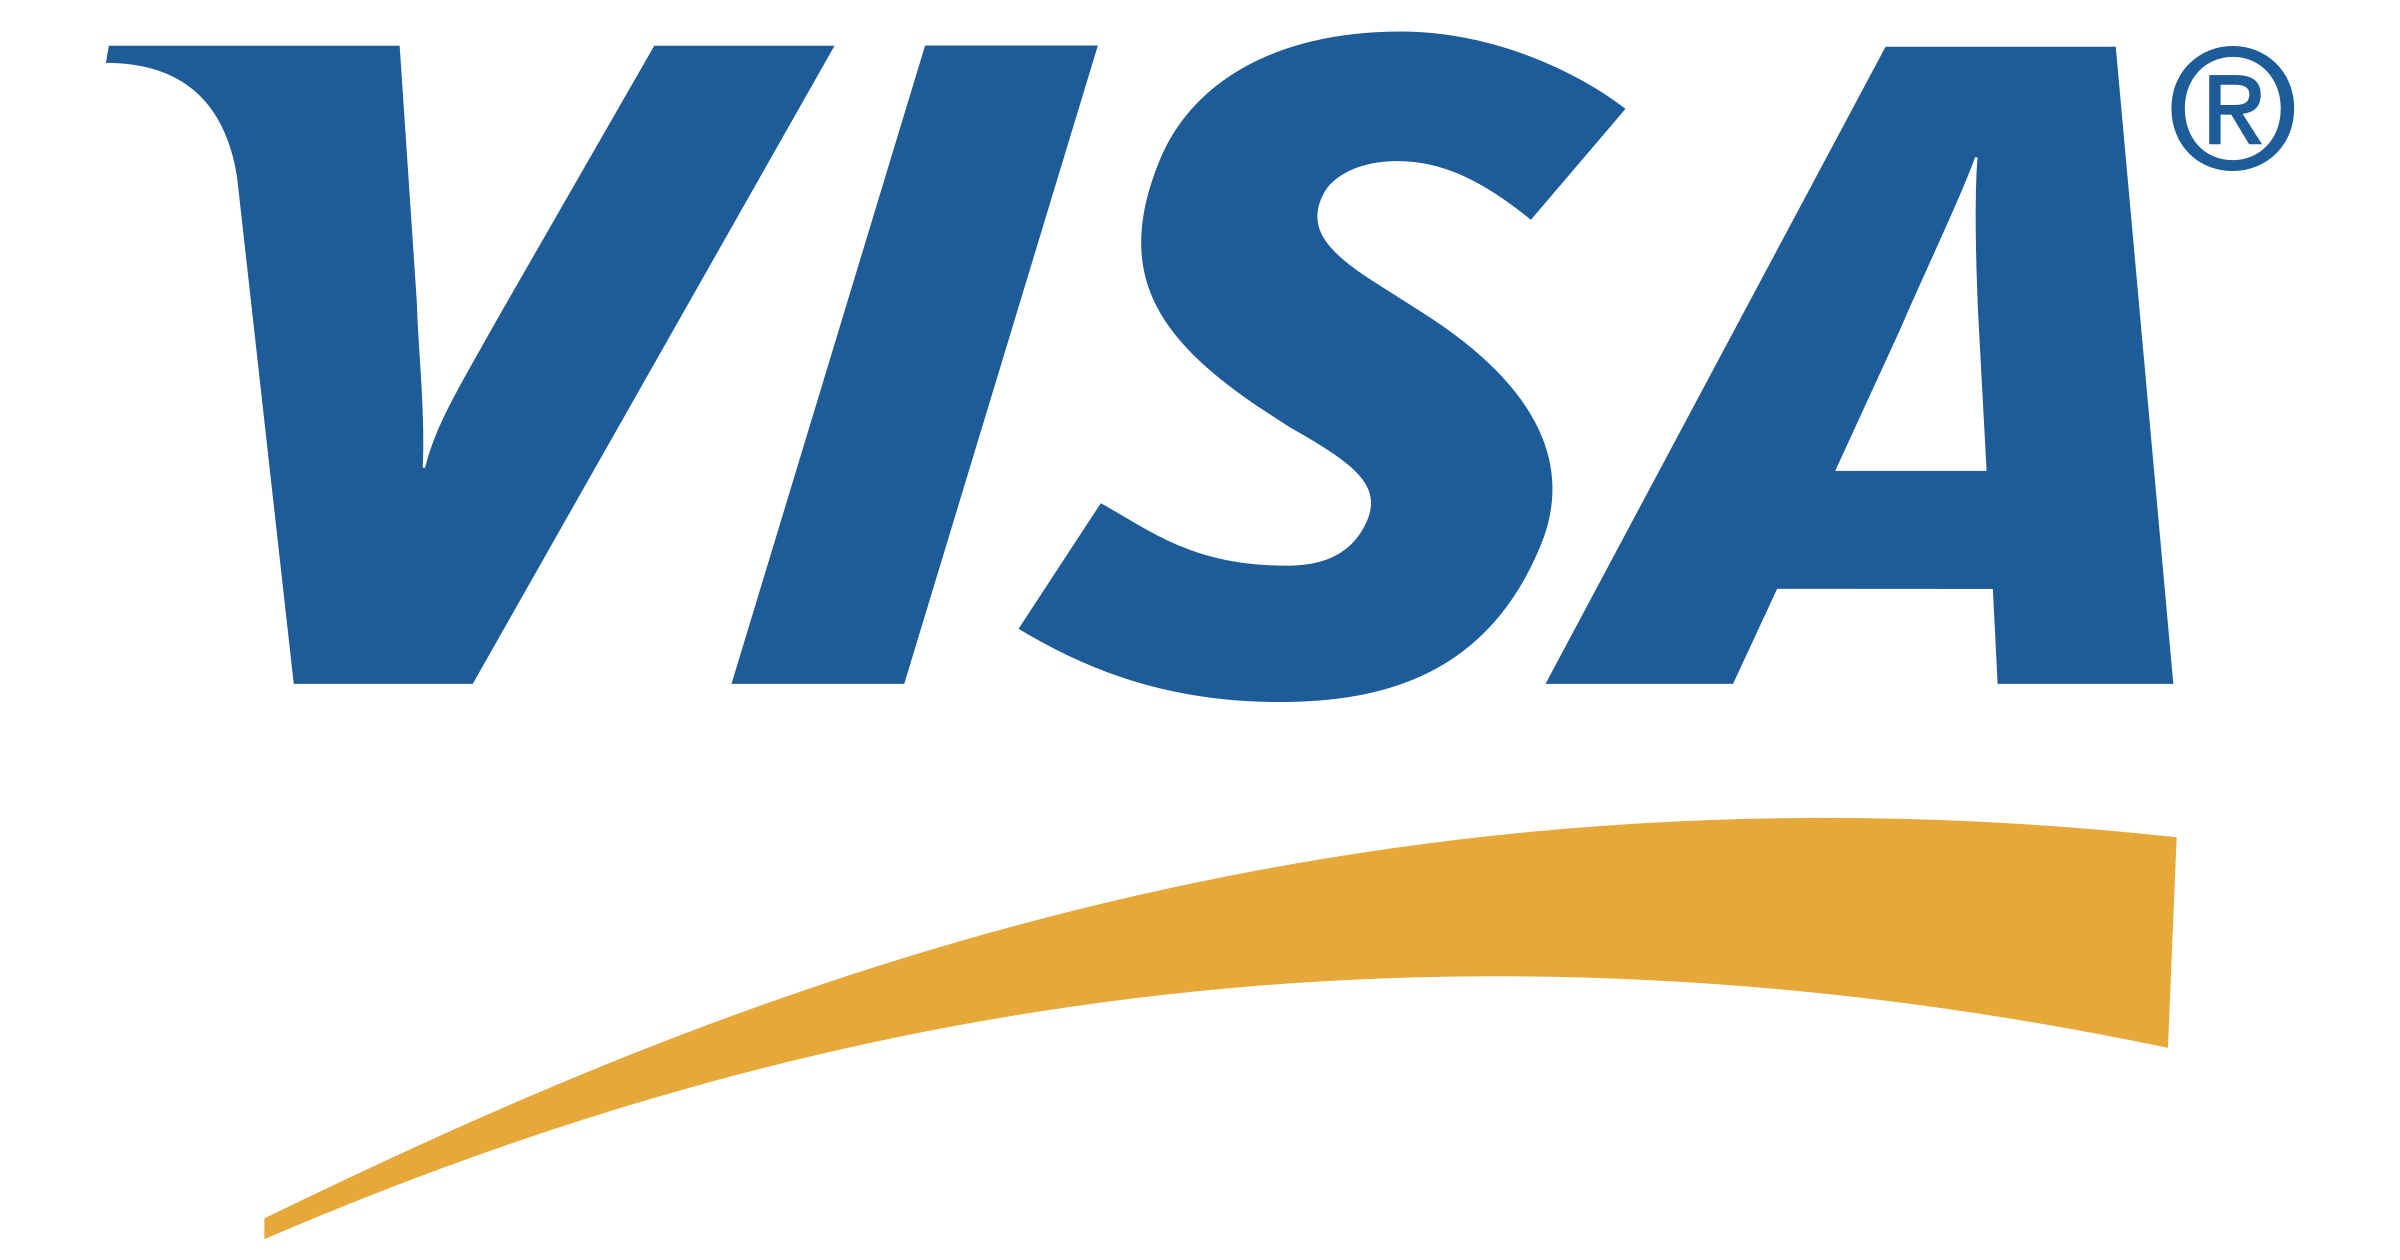 Visa's logo, an American multinational payment card services corporation.